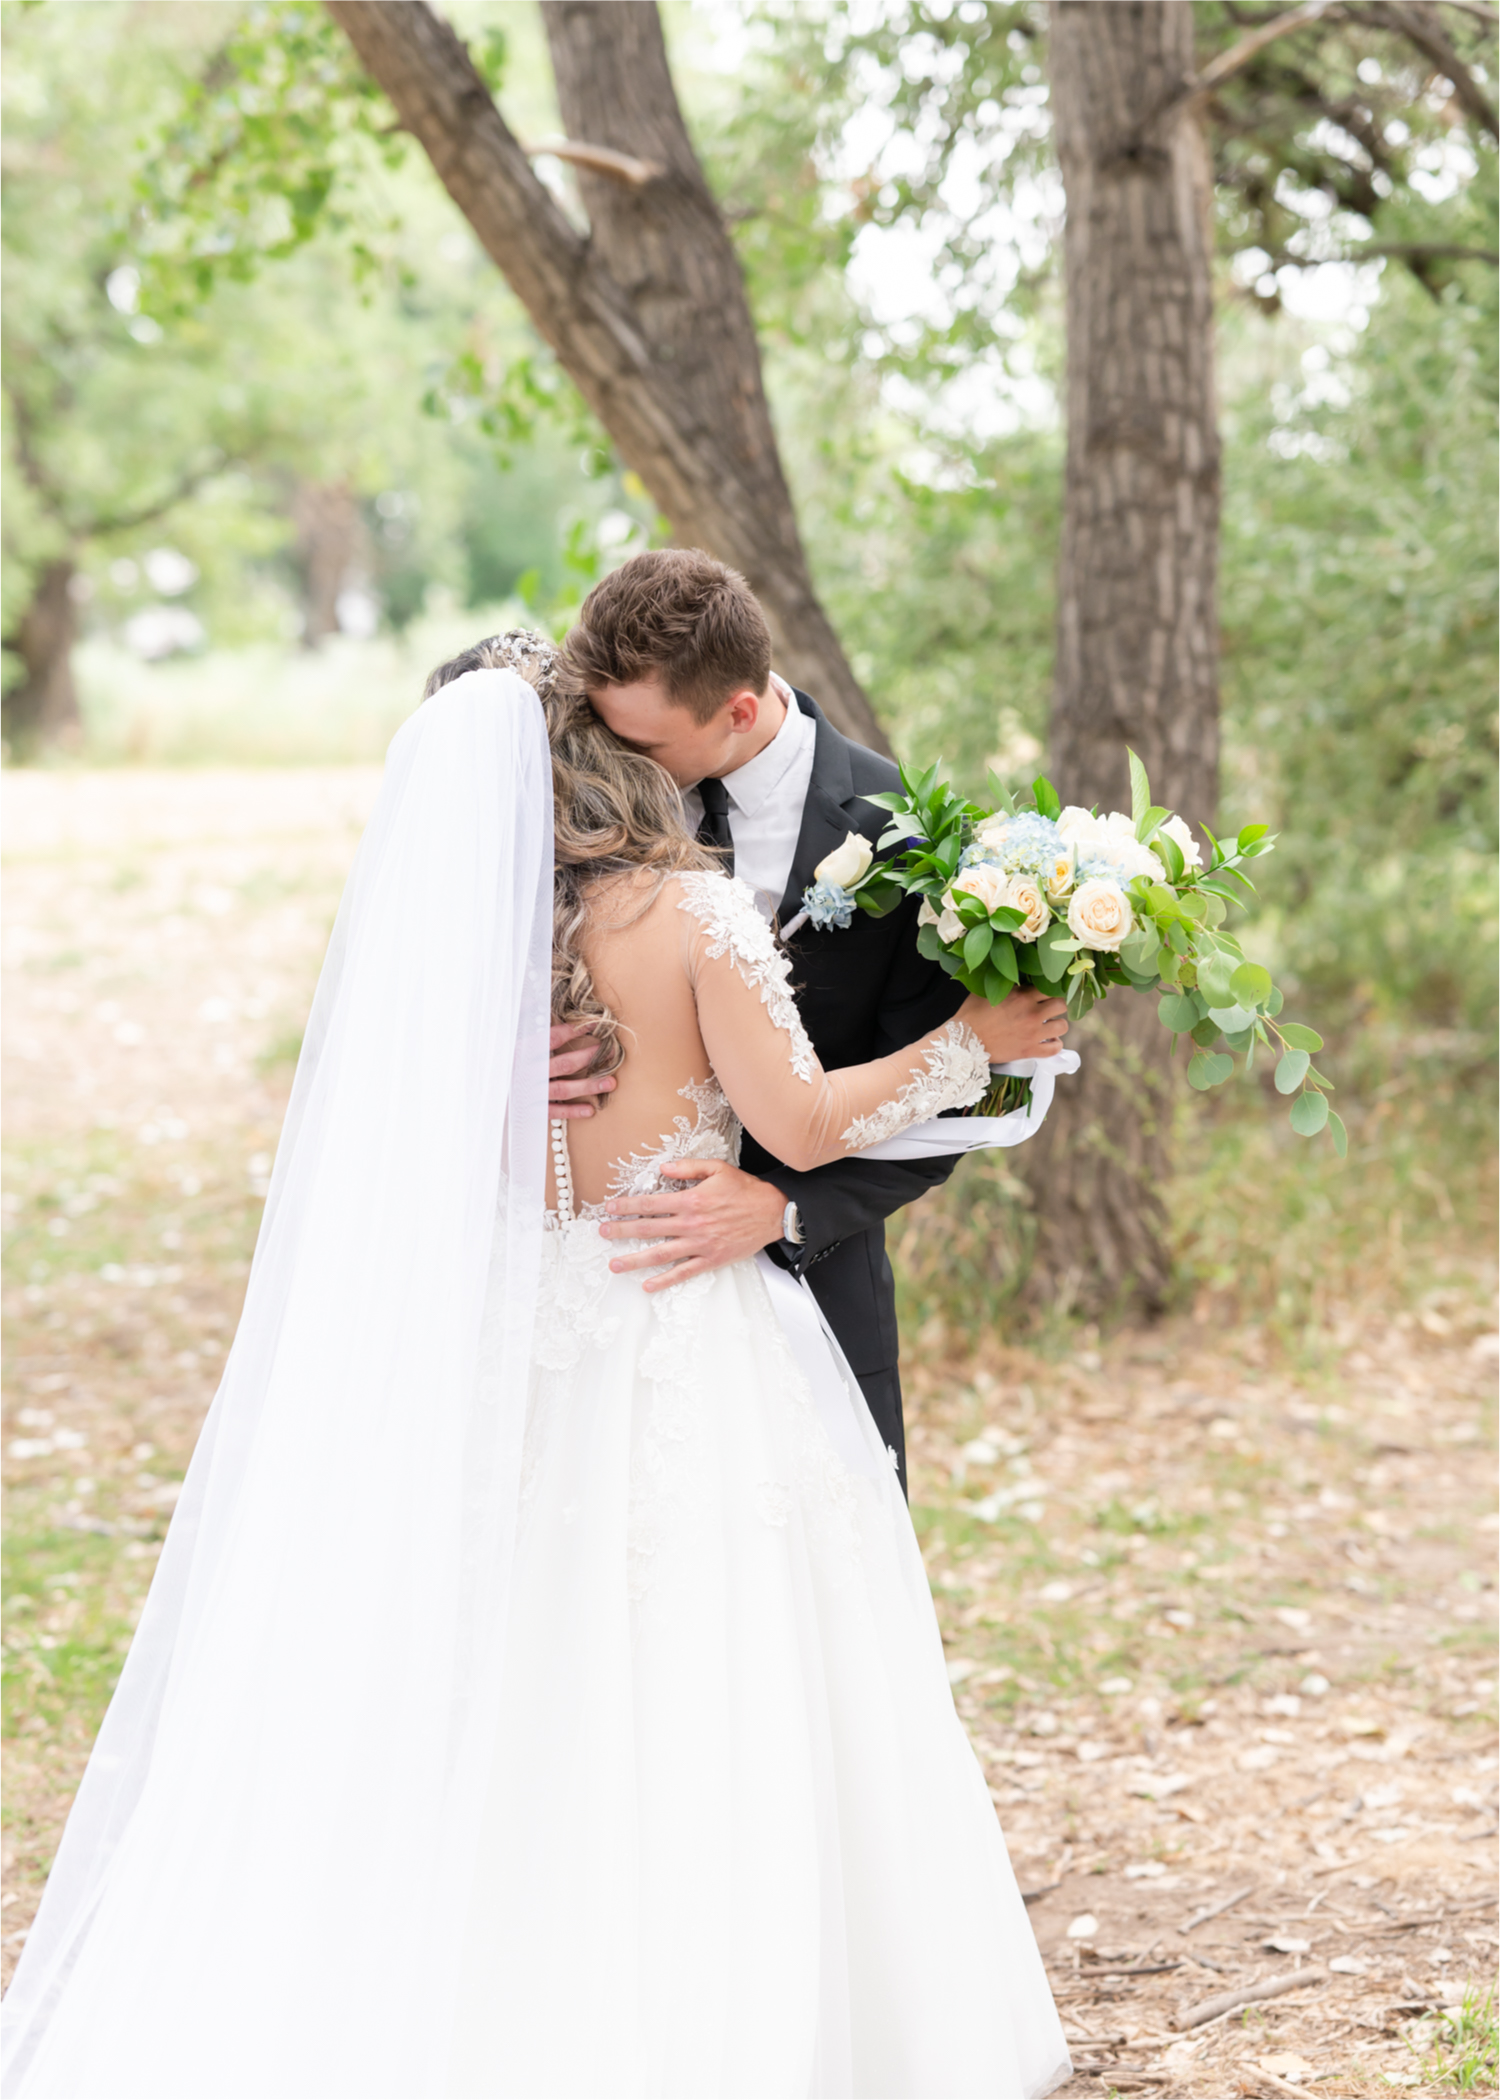 Romantic and Rustic Wedding at The Mill in Windsor | Britni Girard Photography | Colorado based wedding photography and videography team | Bride and Groom Portraits First Look at Eastman park